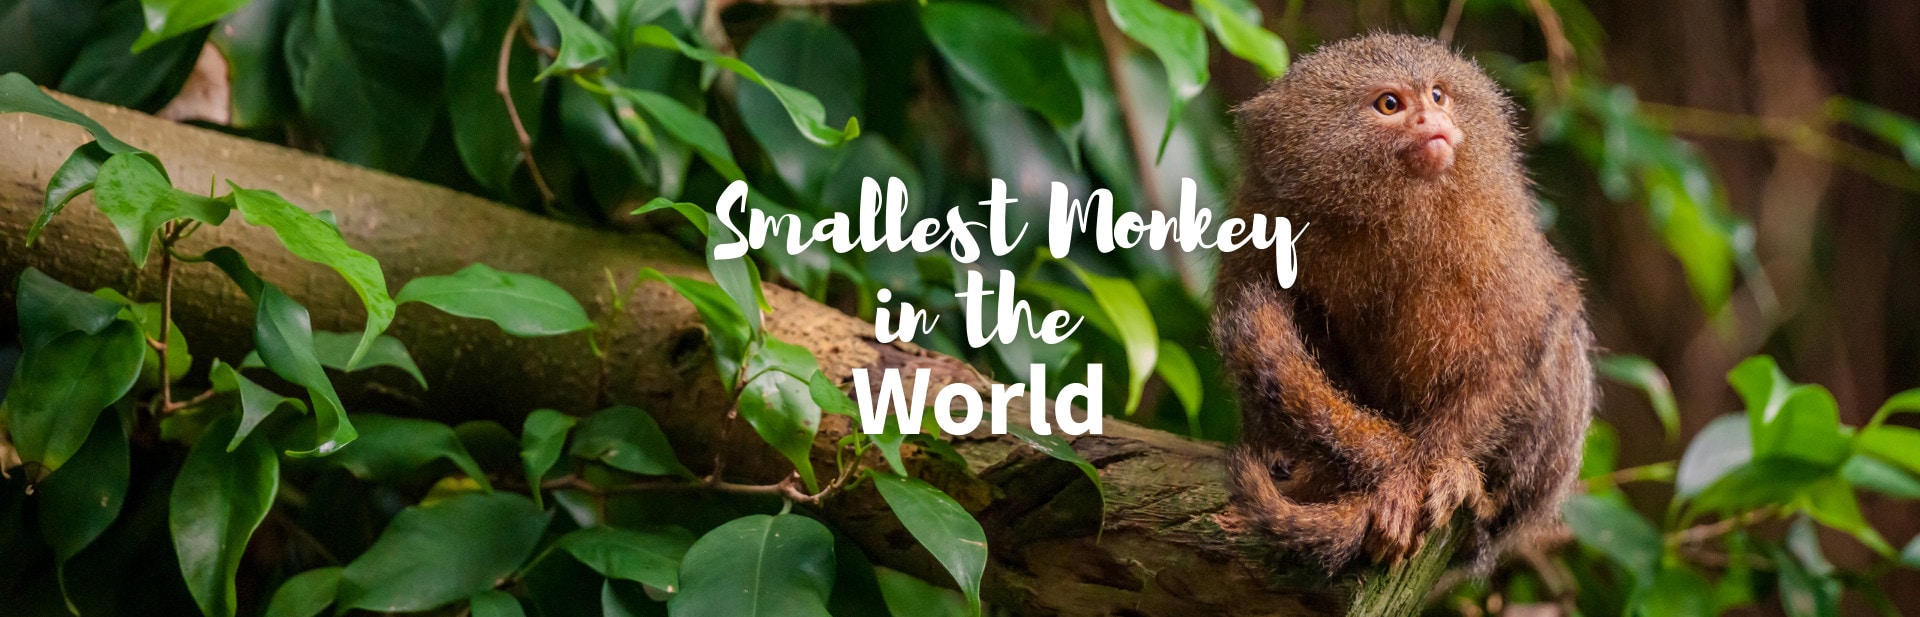 The 7 Smallest Monkeys in the World: Pictures + Facts